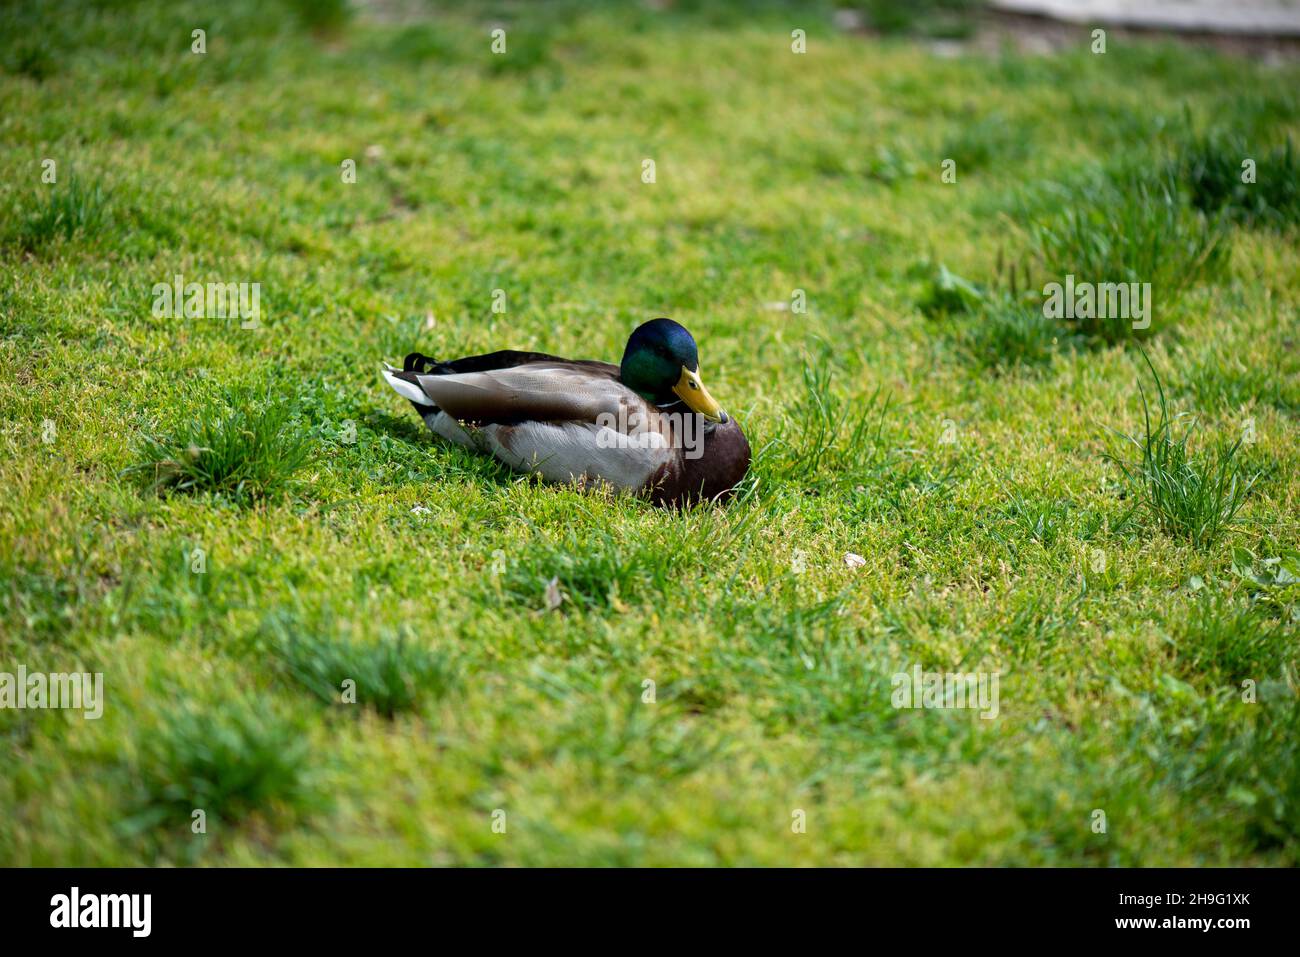 View of a duck crouching in the grass Stock Photo